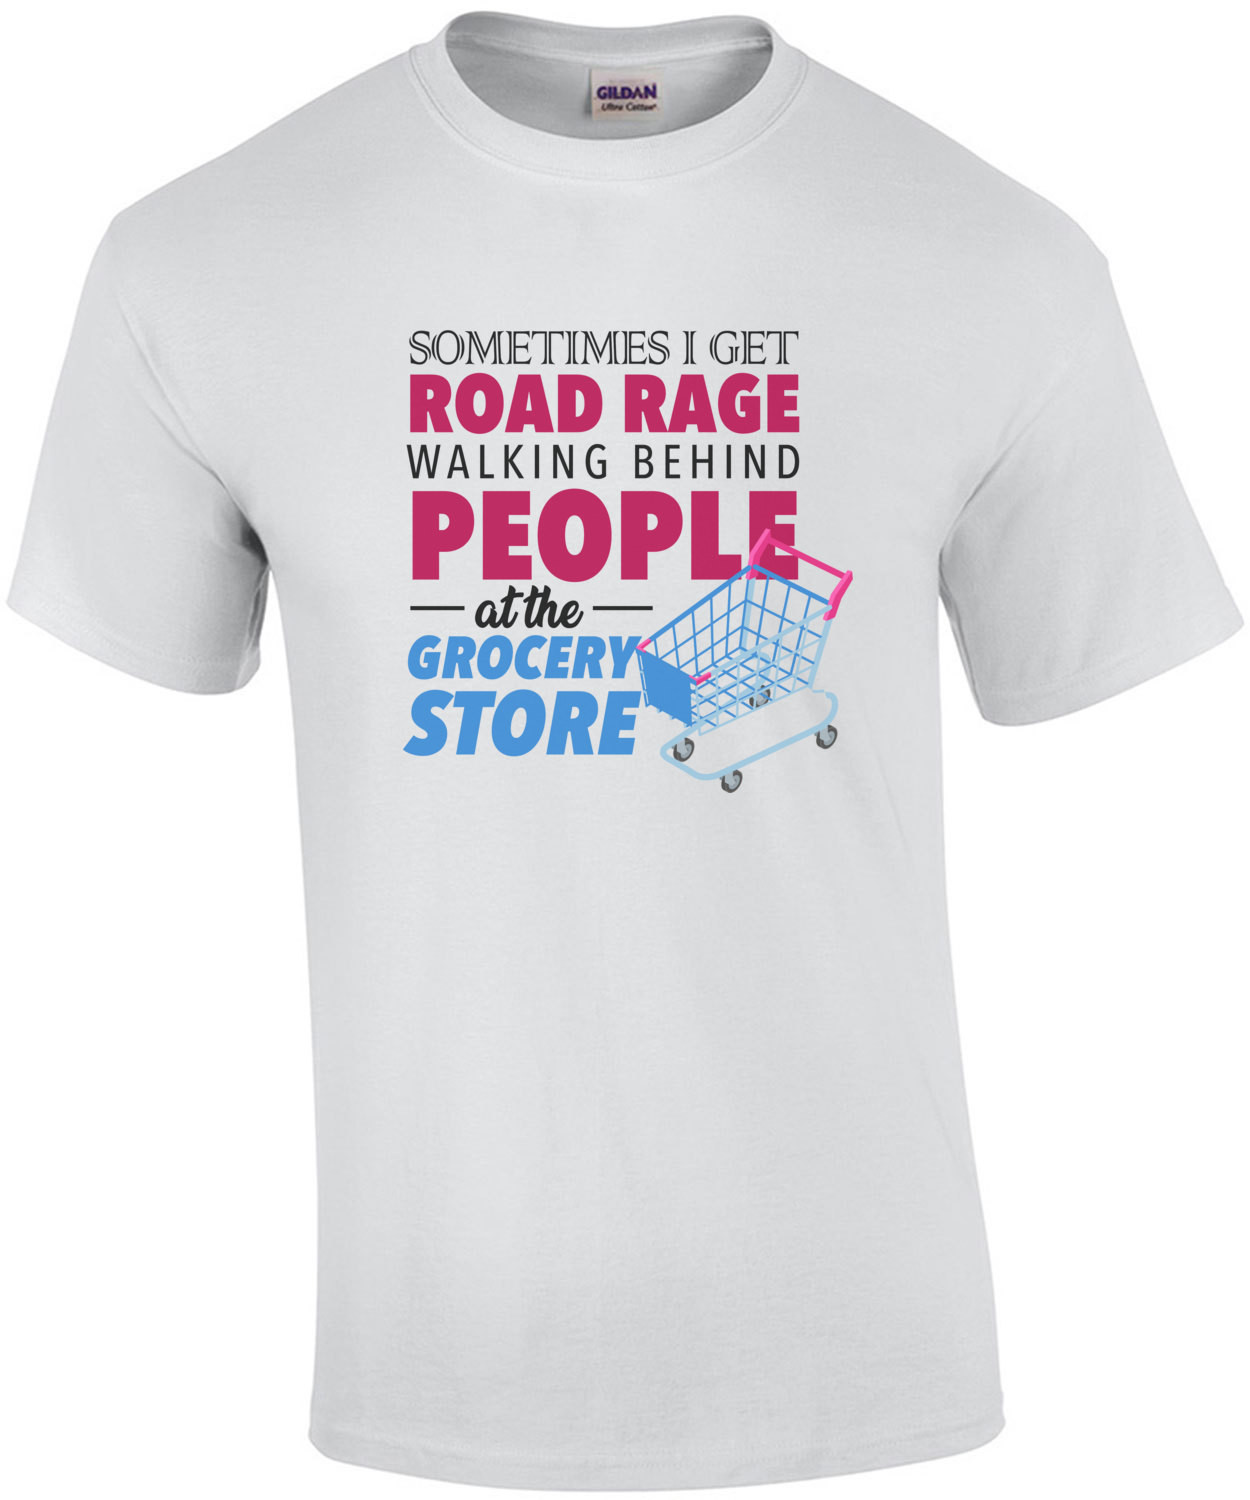 Sometimes I get road rage walking behind people at the grocery store - funny t-shirt